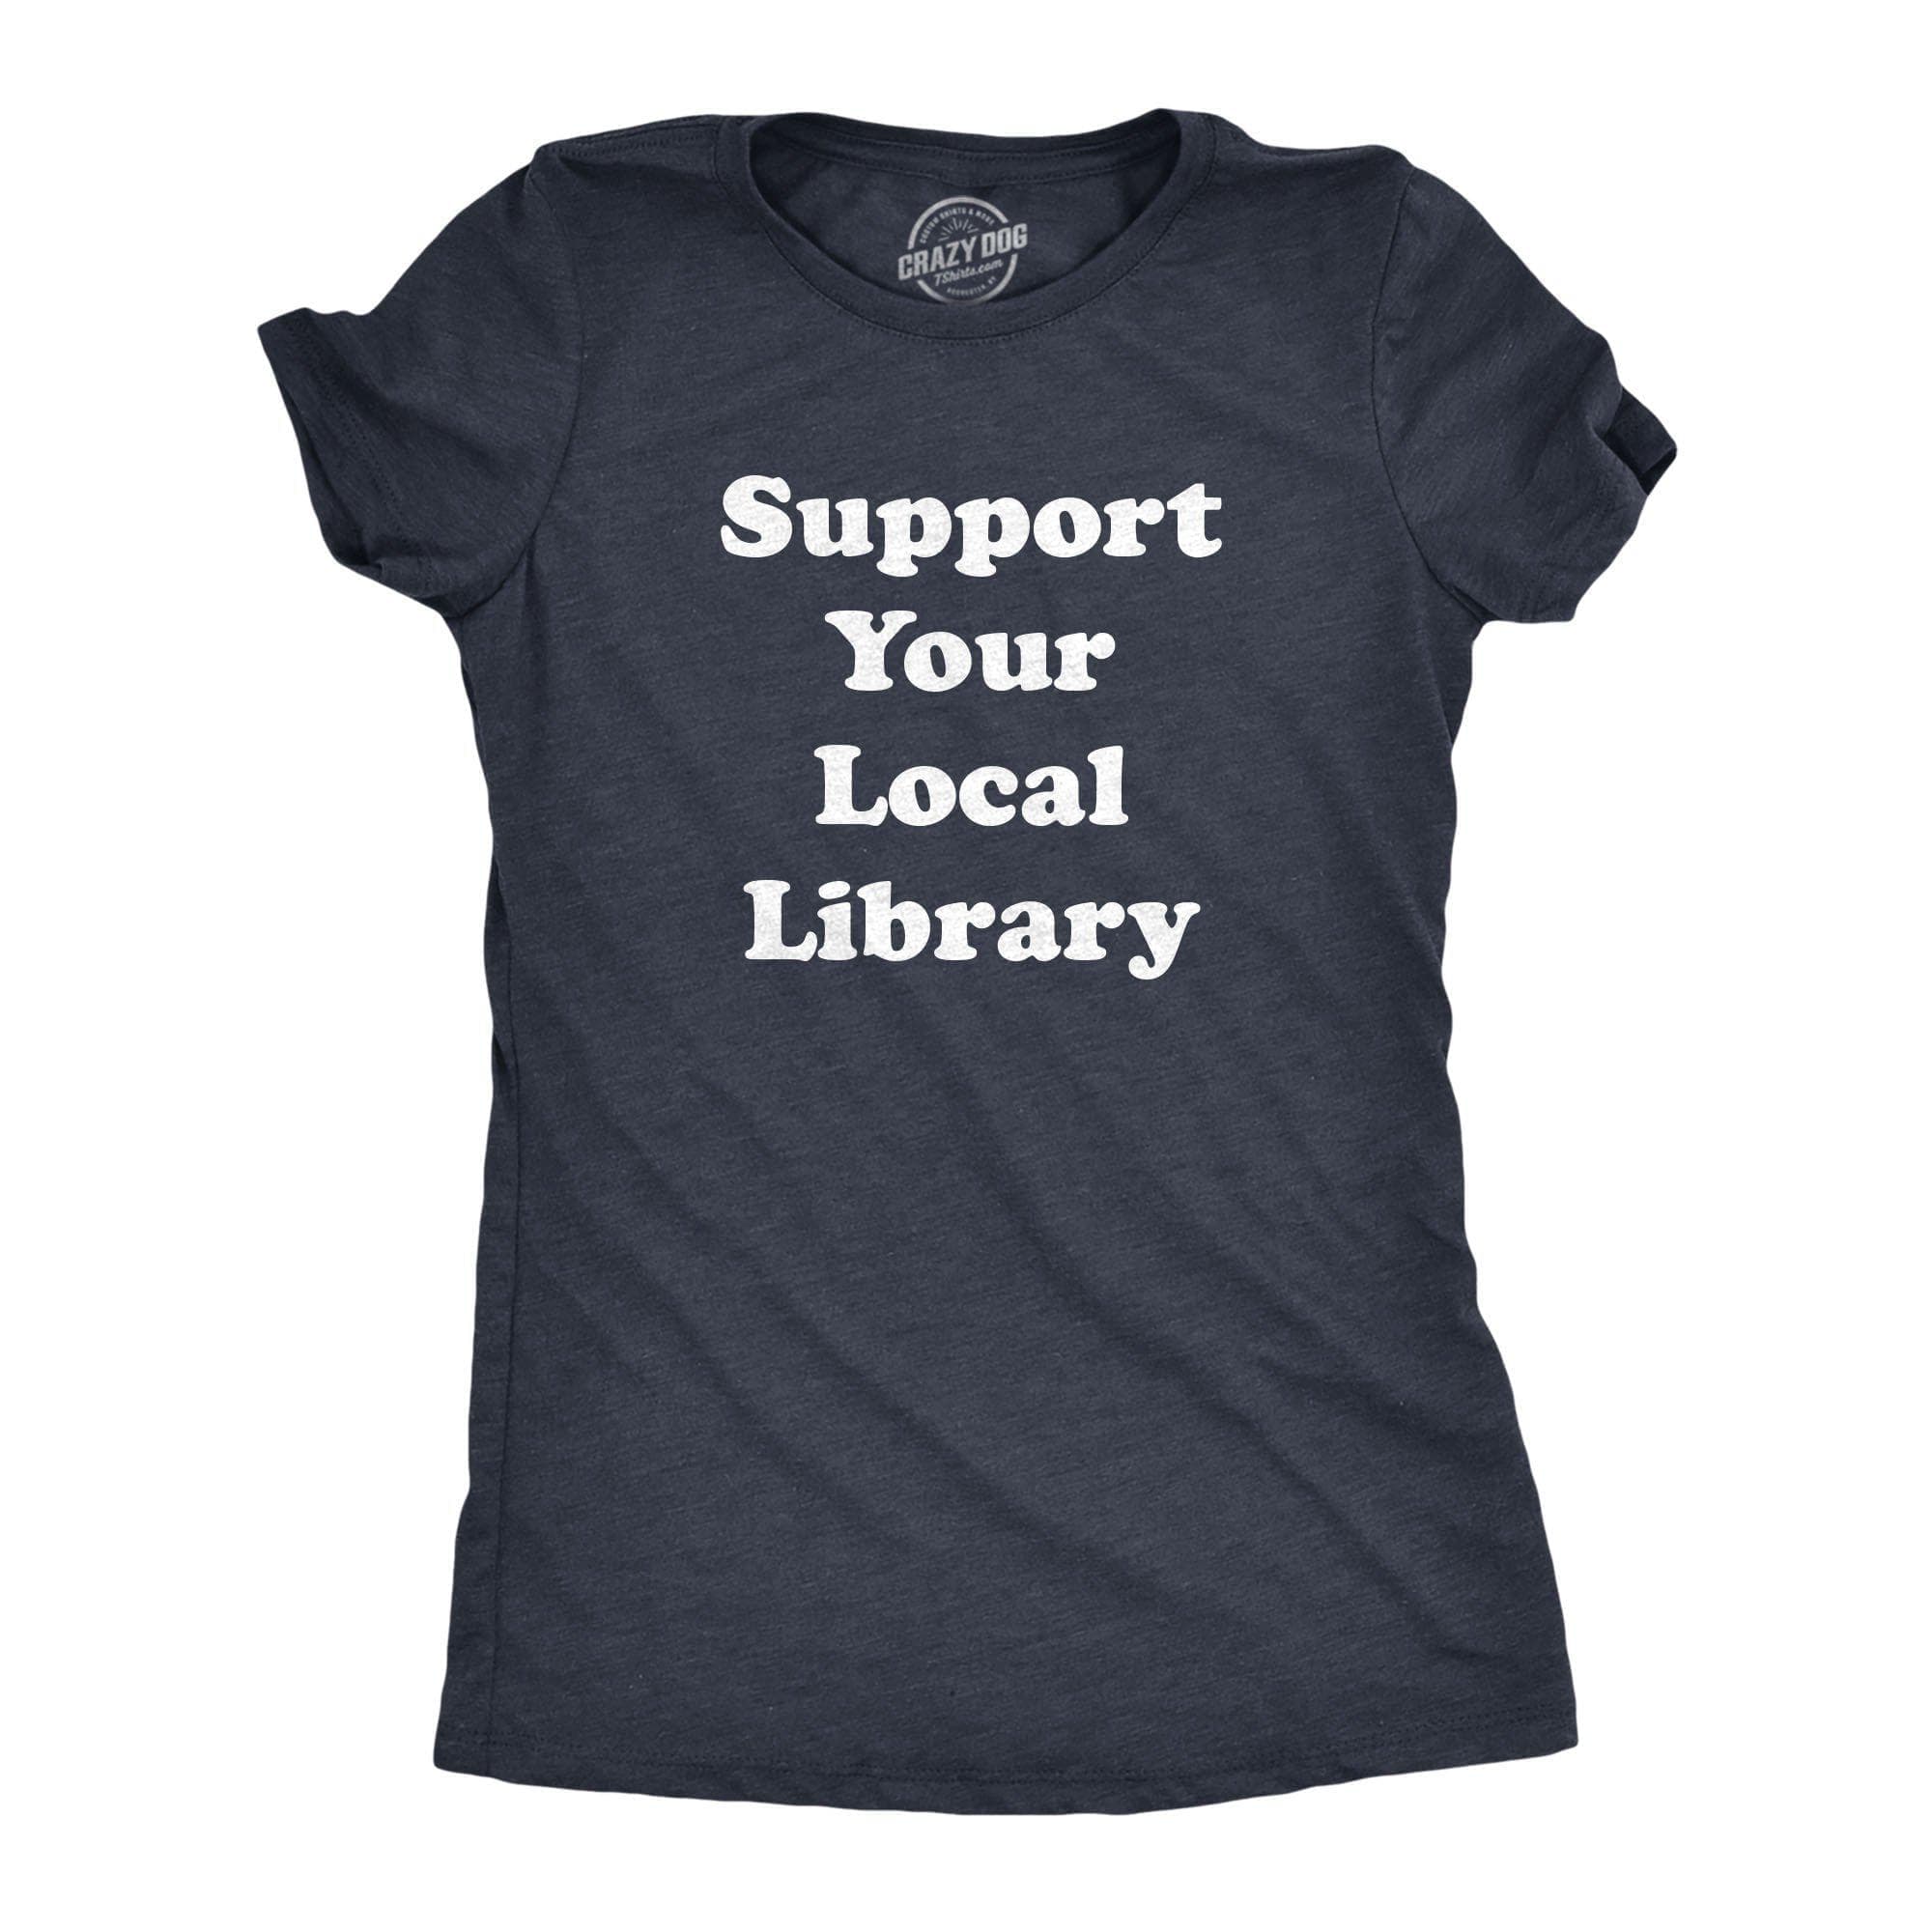 Support Your Local Library Women's Tshirt - Crazy Dog T-Shirts